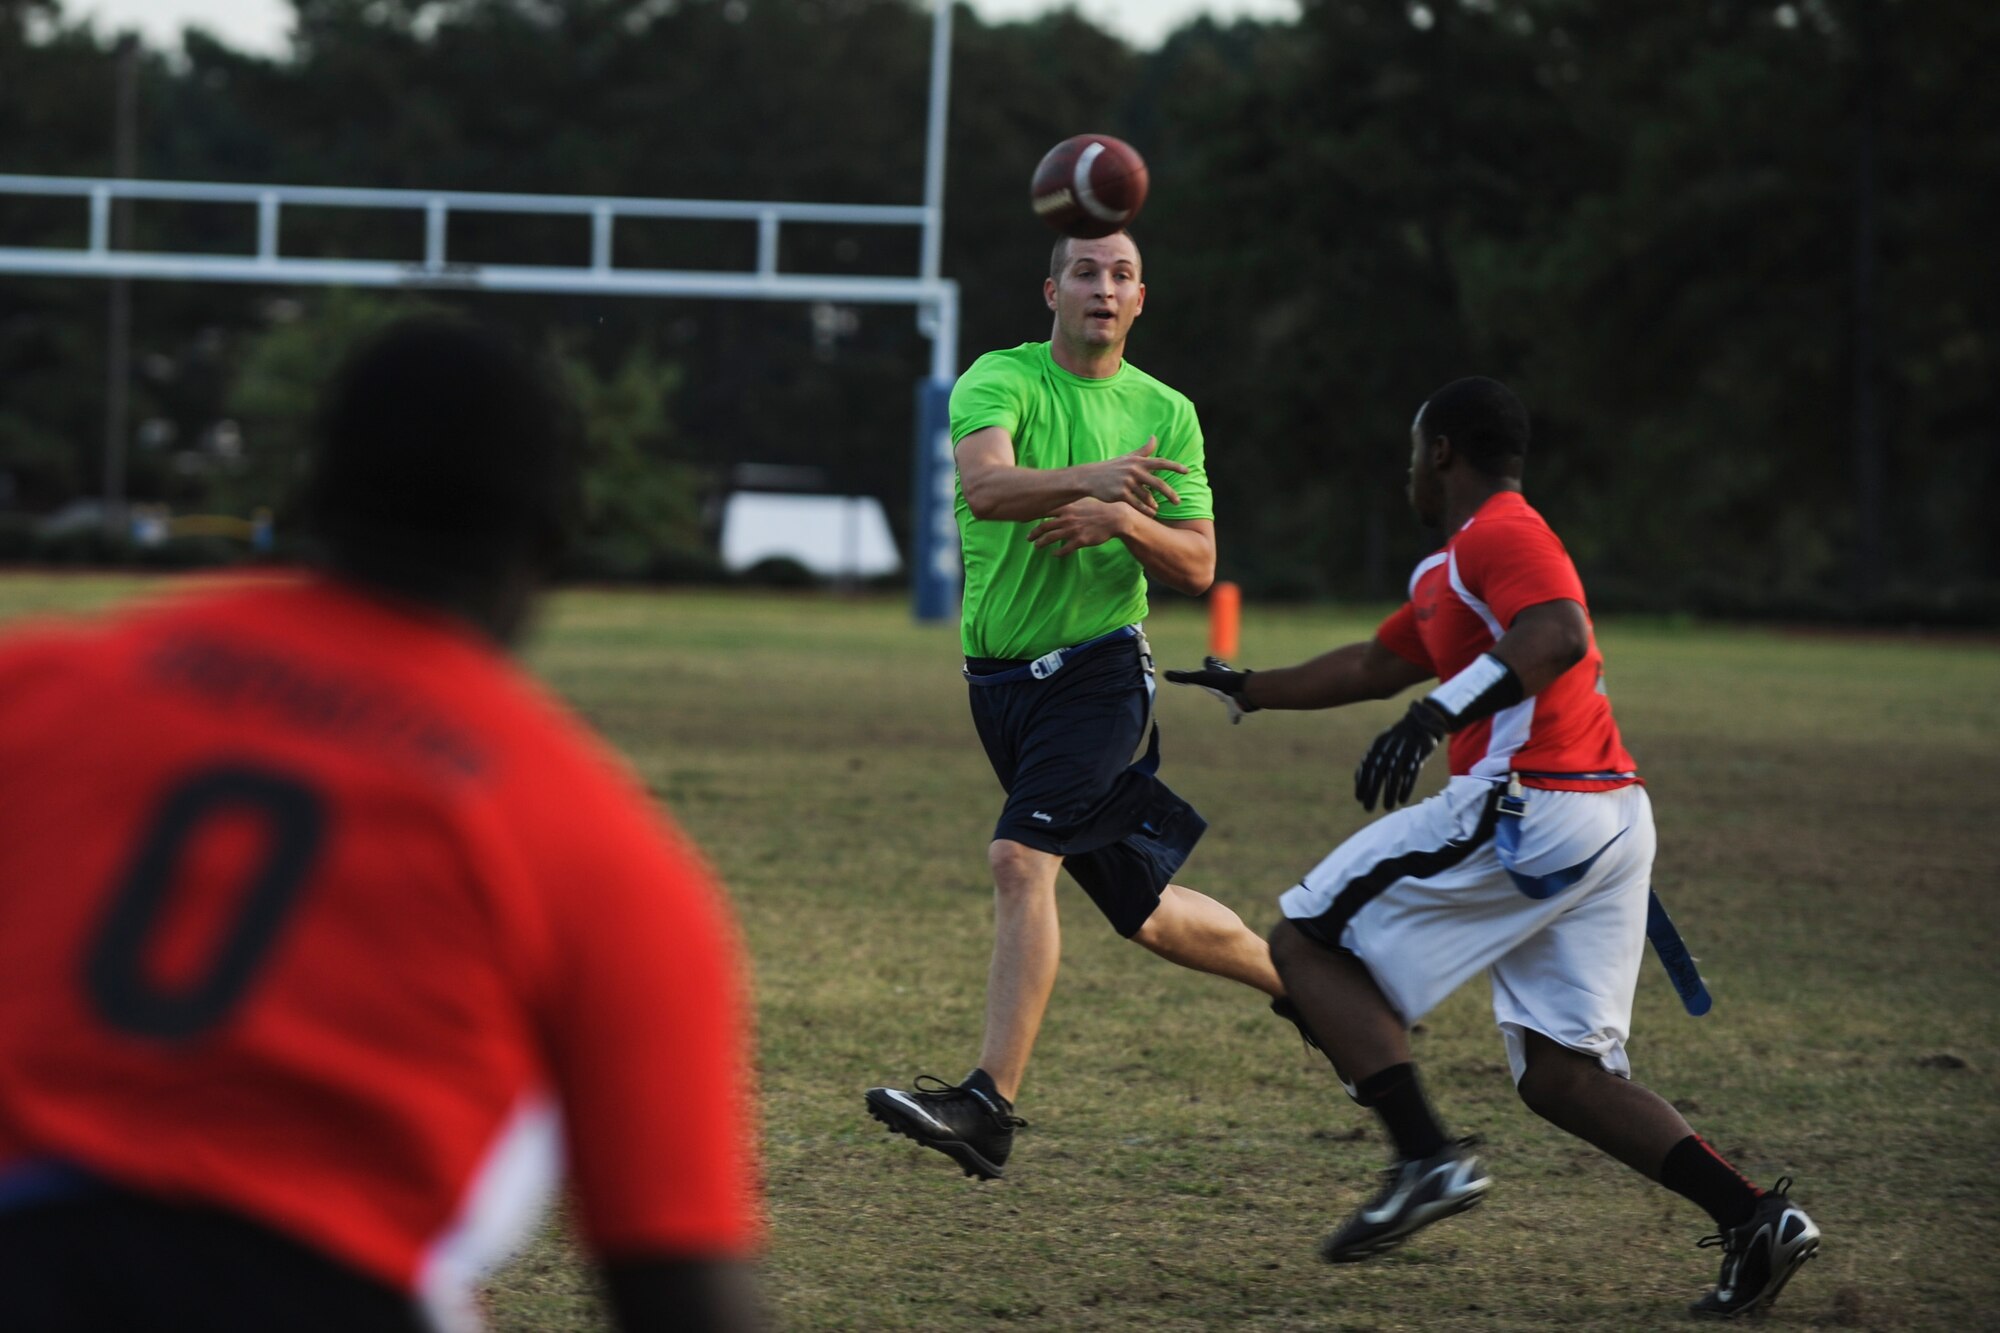 Staff Sgt. Bryan Wails, quarterback for the 19th Logistic Readiness Squadron attempts a pass late in the second half during an intramural flag football game Oct. 9, 2014, at Little Rock Air Force Base, Ark. Wails went six for six on this drive before taking a commanding 19-0 lead into the first half. (U.S. Air Force photo by Airman 1st Class Cliffton Dolezal)